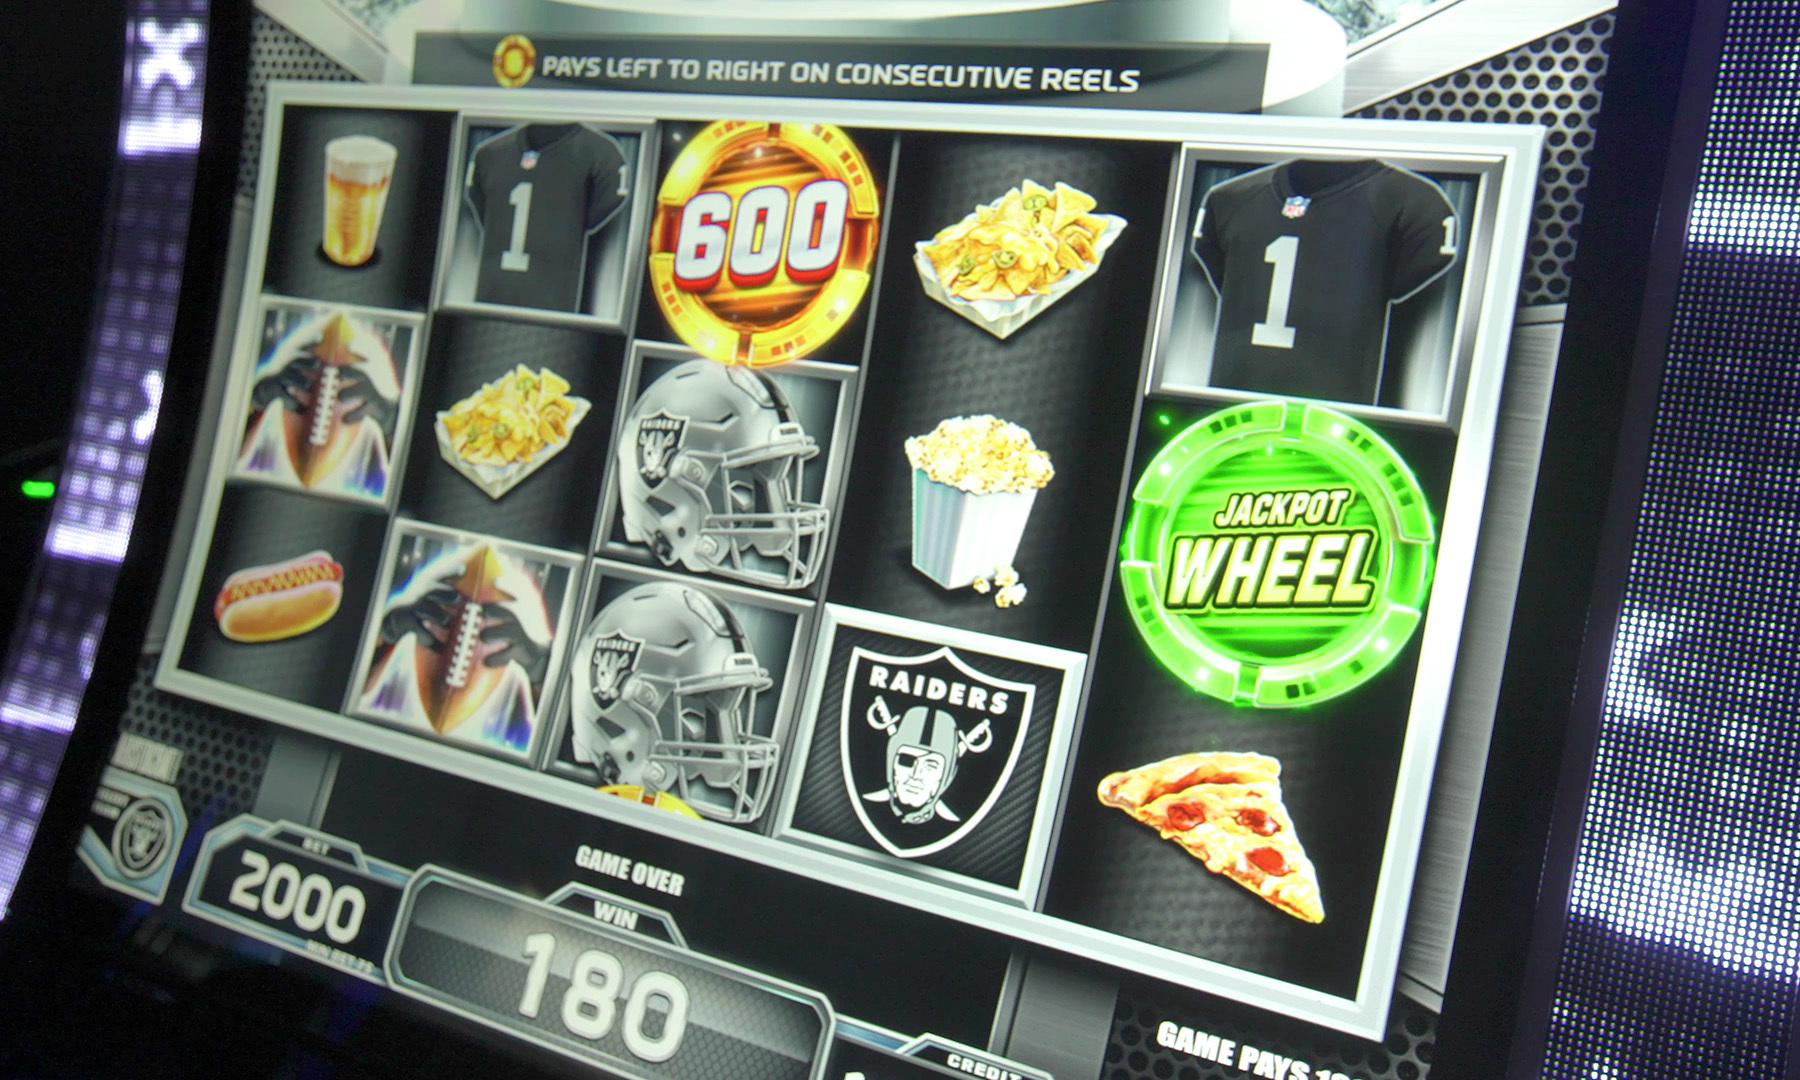 NFL-themed slot machines headed to casino floors in the fall allow players to select the logos, helmets and symbols of their favorite team to appear on the game’s spinning reels. (Courtesy of Aristocrat Gaming)